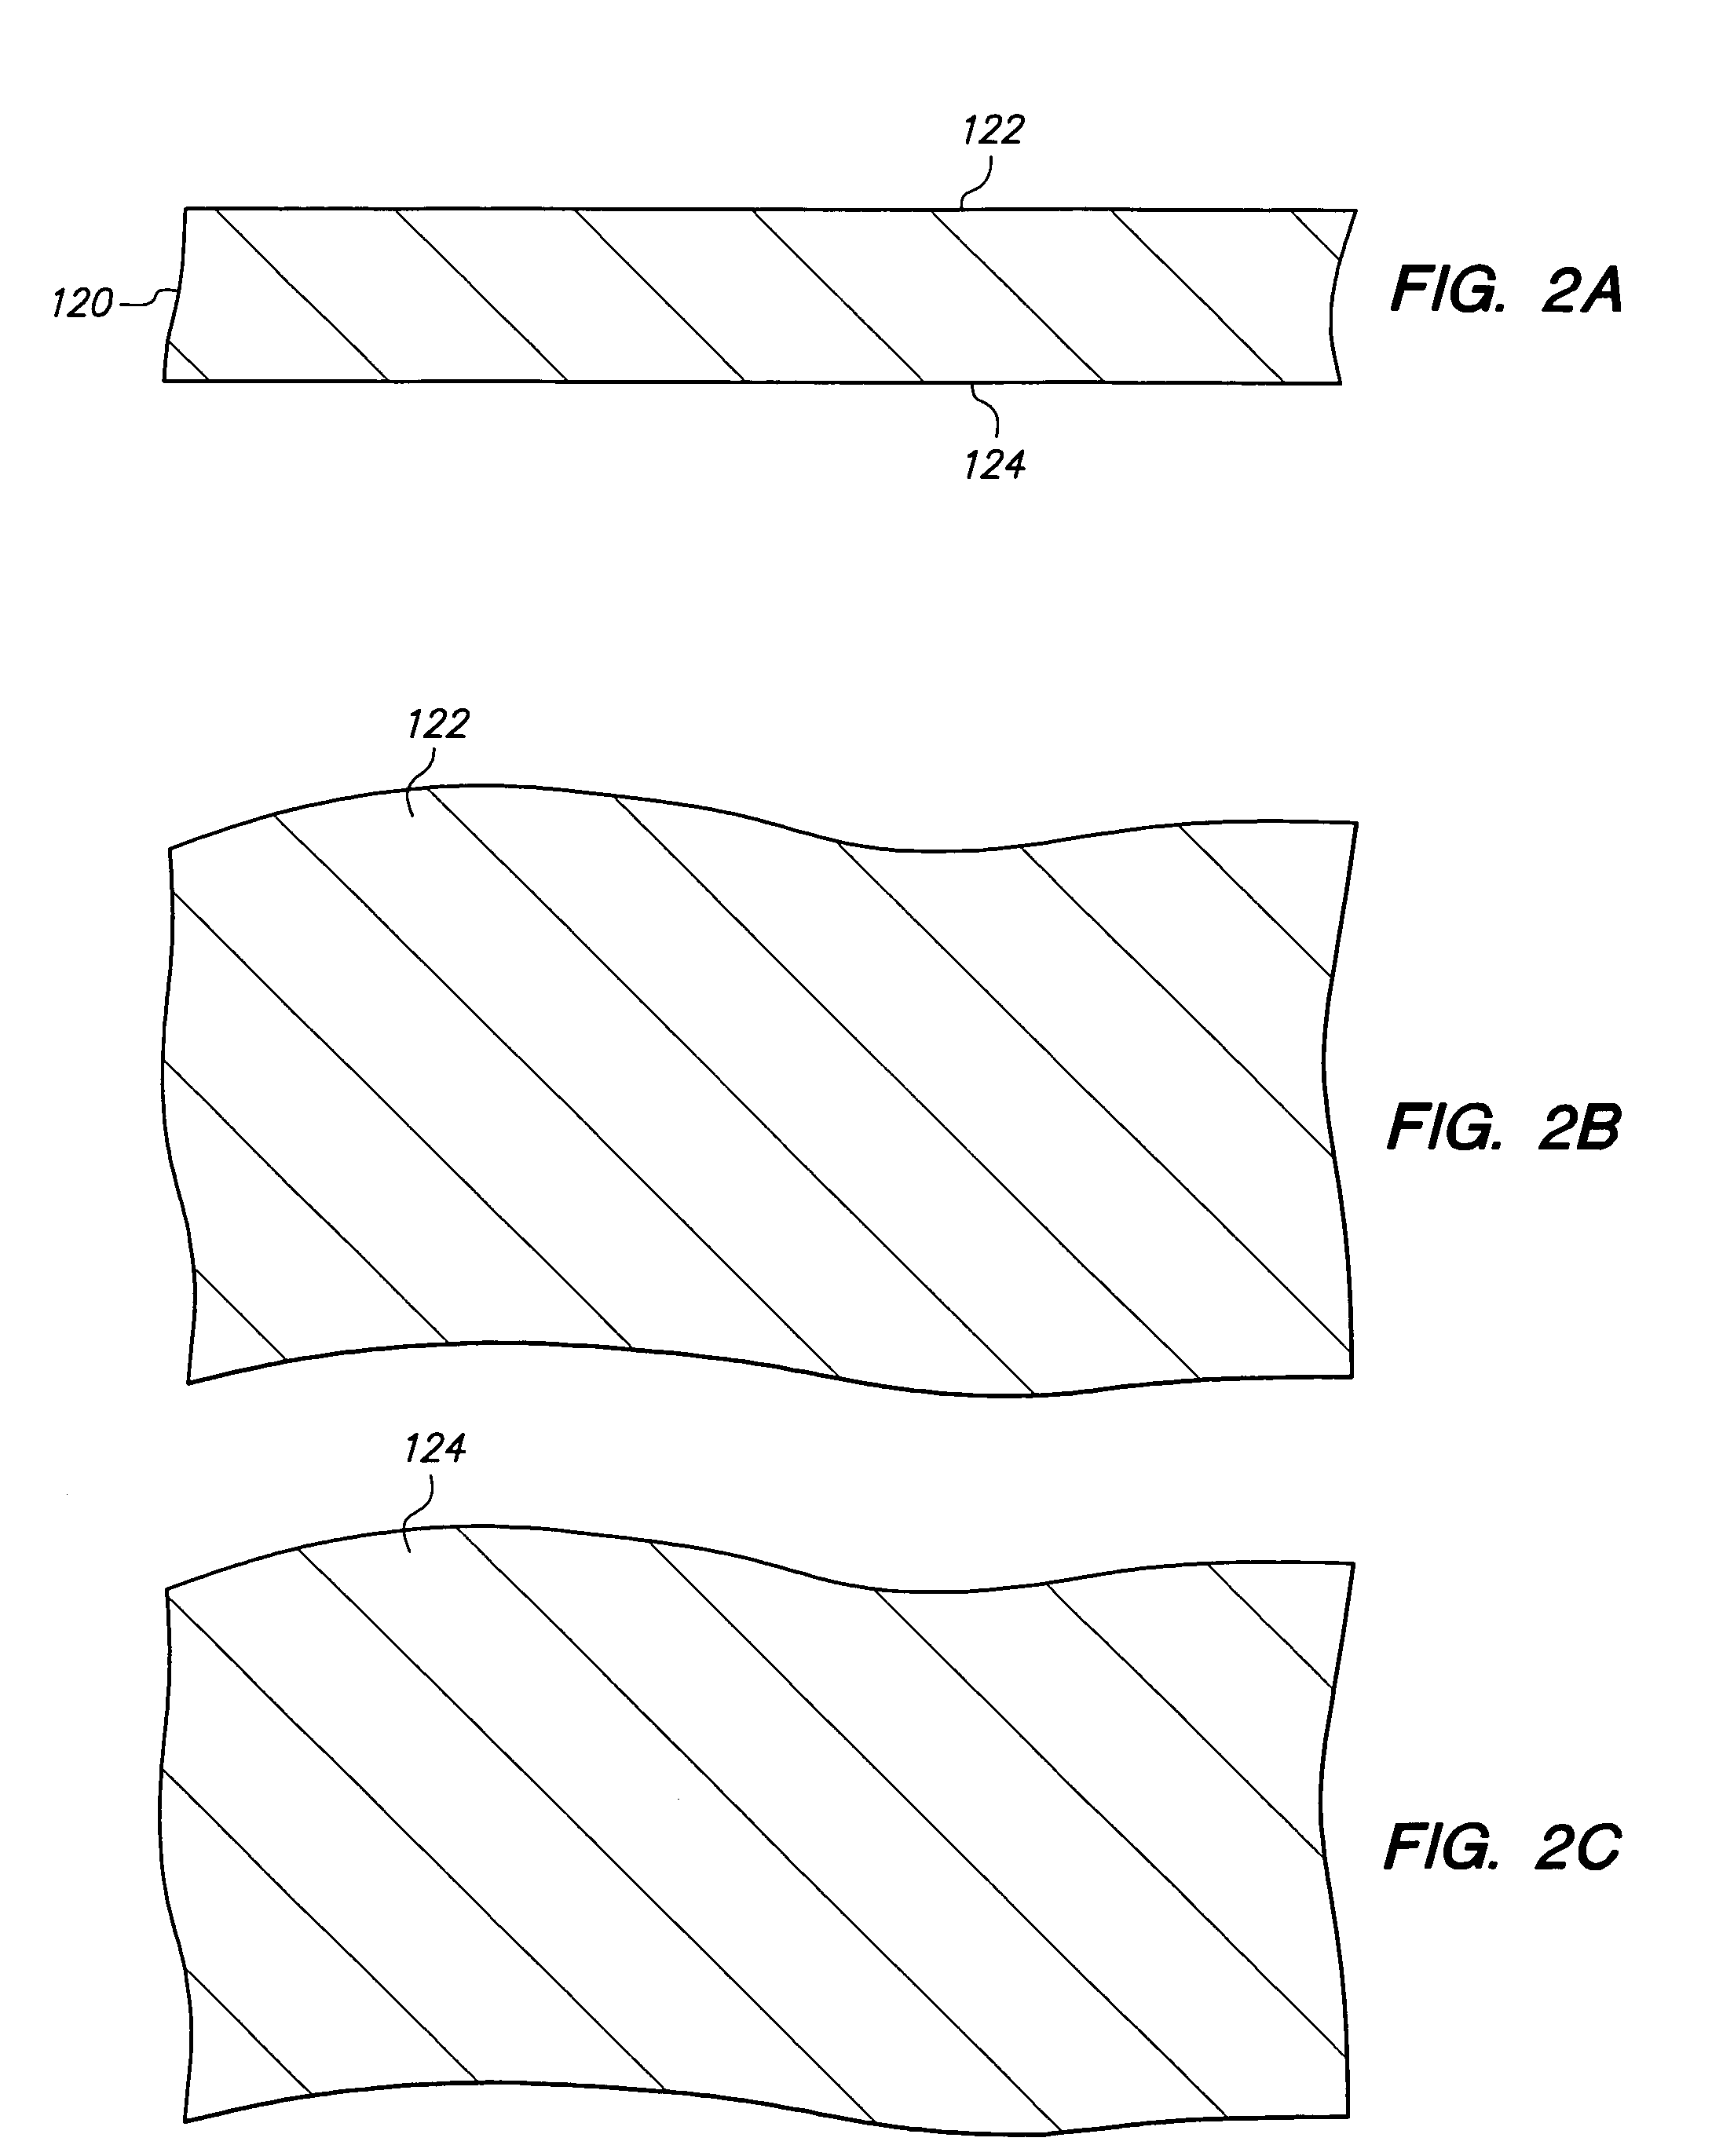 Method of making a semiconductor chip assembly with a metal containment wall and a solder terminal